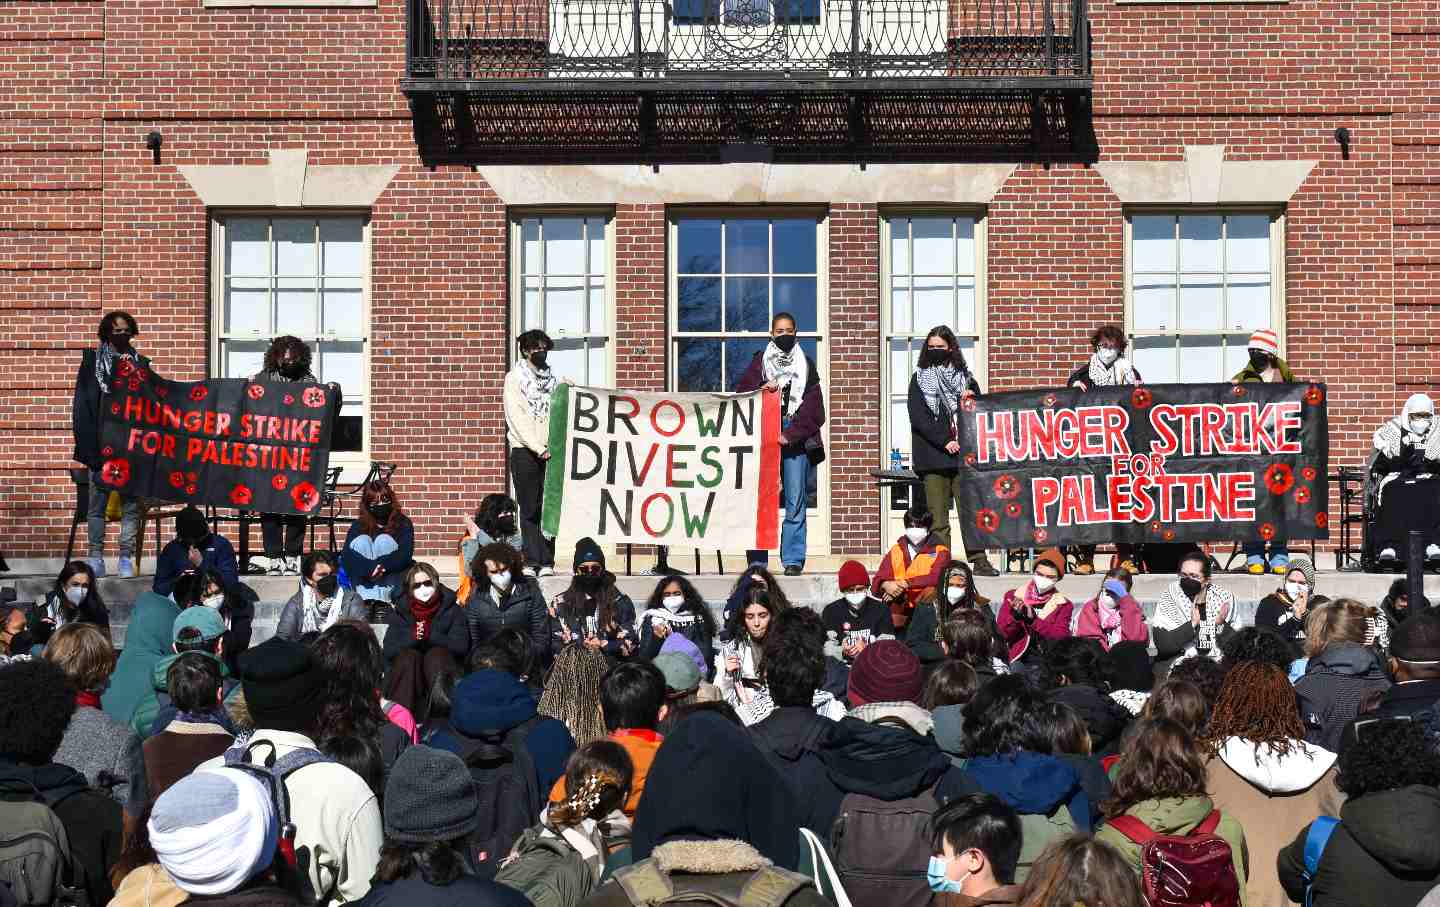 Brown University Students Are on a Hunger Strike for Palestine